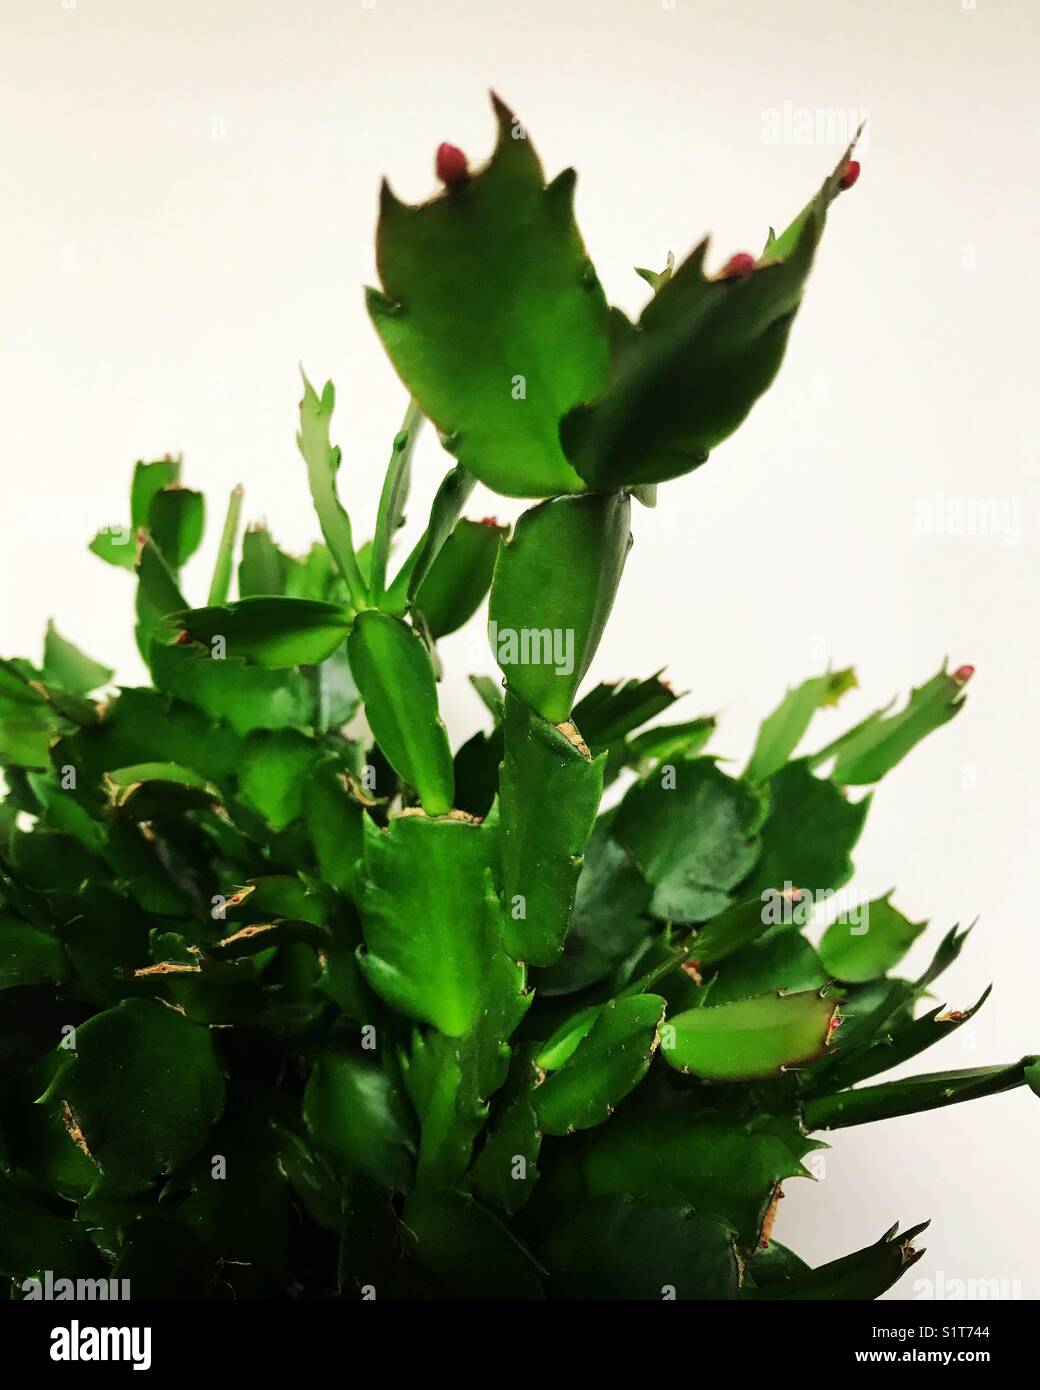 The Office Christmas cactus getting ready to bloom Stock Photo